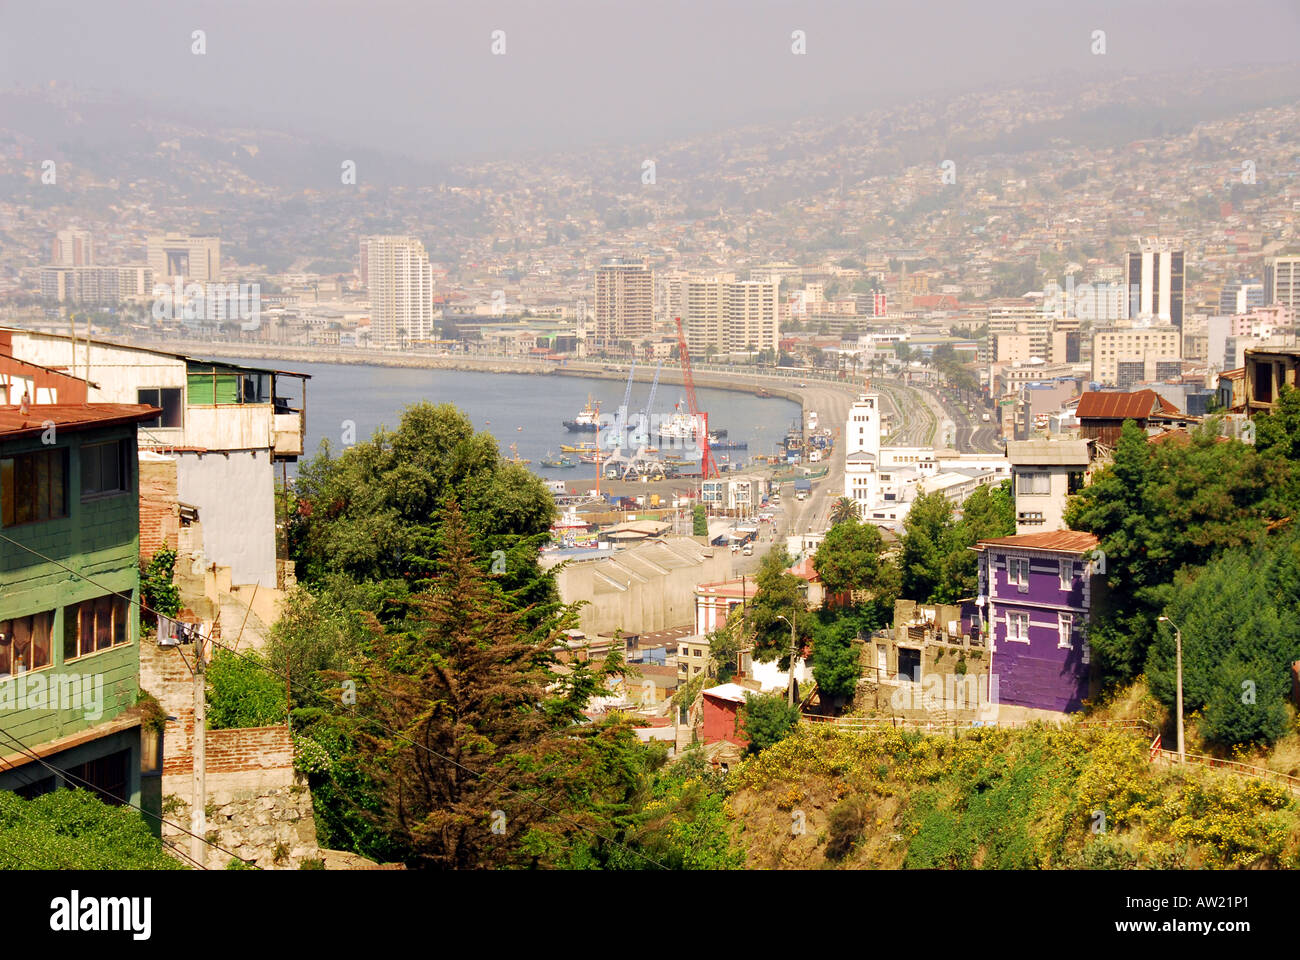 Chile Valparaiso city scenic harbor overview from above mountain hillside Stock Photo